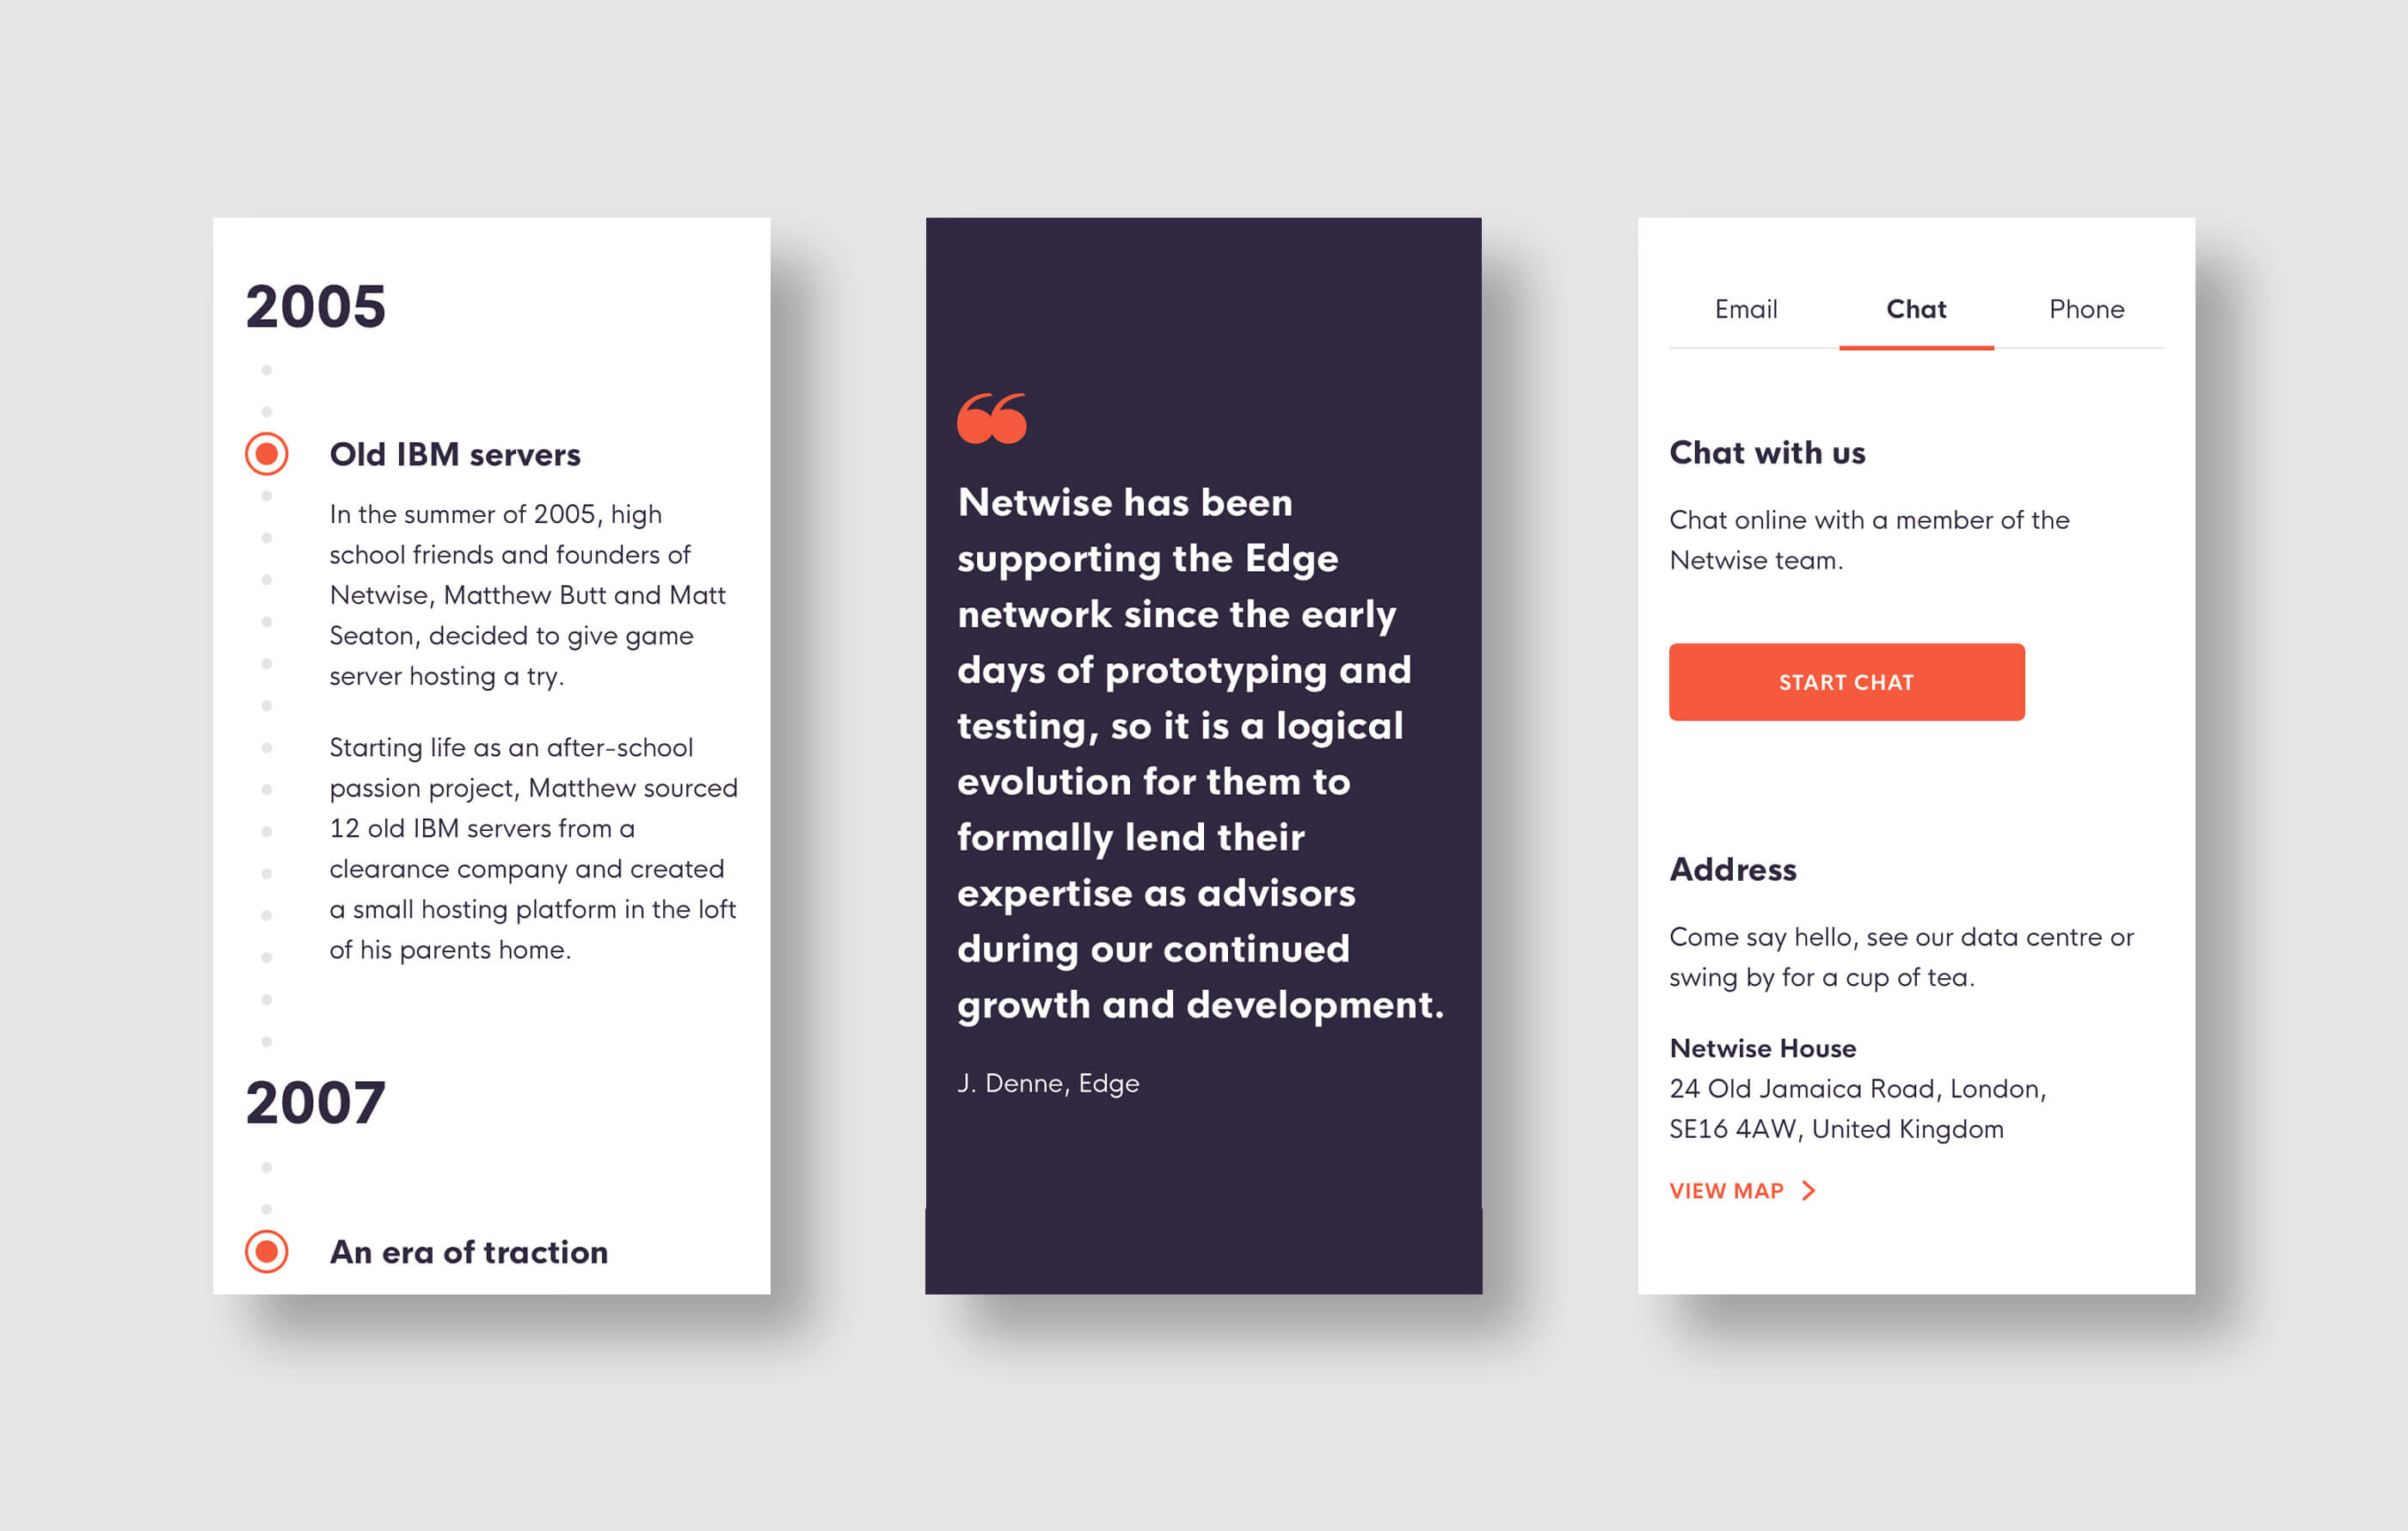 Three mobile phone mockups, featuring a historical timeline of Netwise as a business, client quote and 'Contact Us' chat options